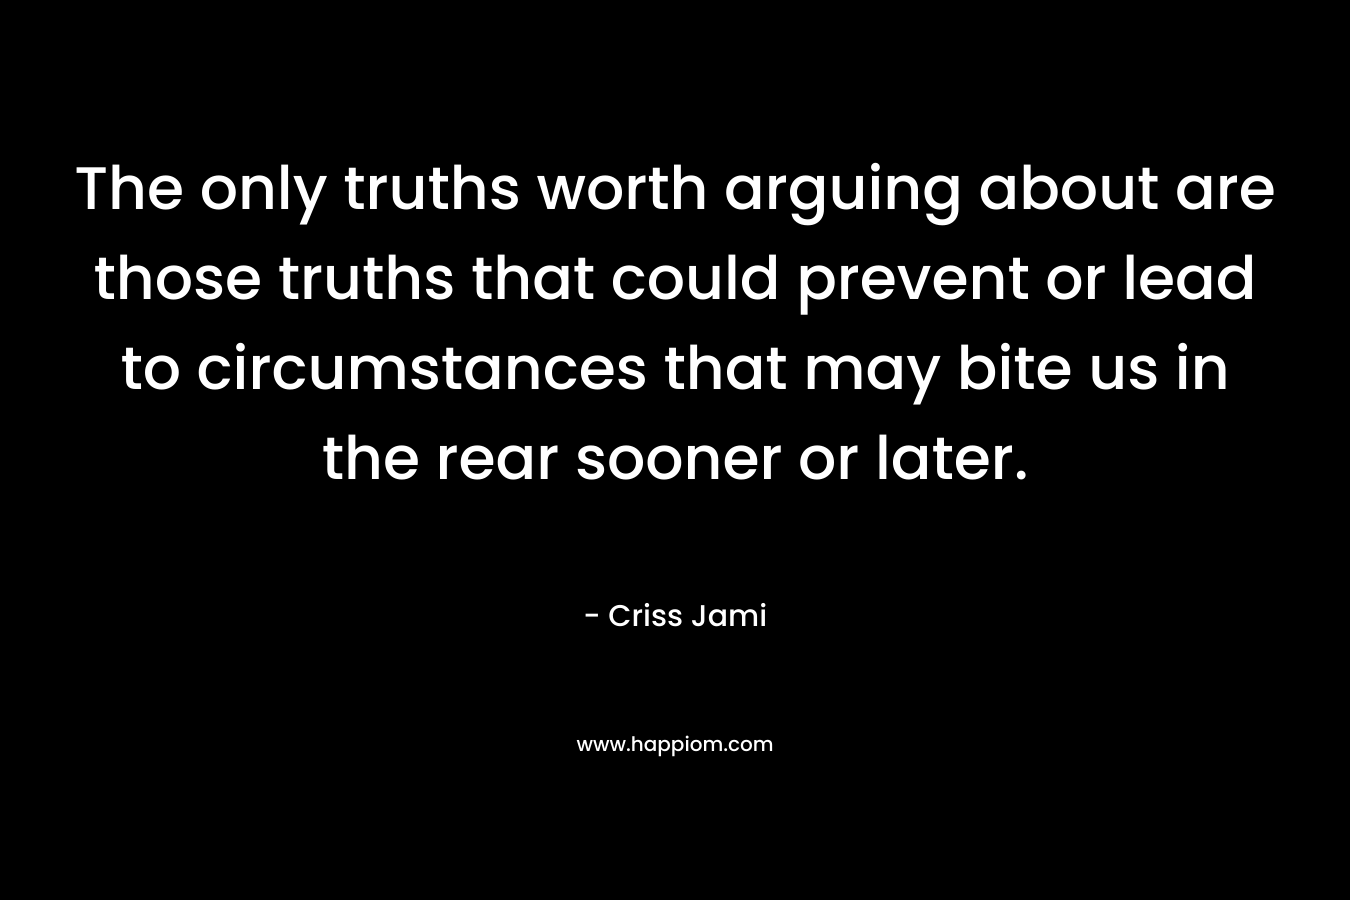 The only truths worth arguing about are those truths that could prevent or lead to circumstances that may bite us in the rear sooner or later. – Criss Jami